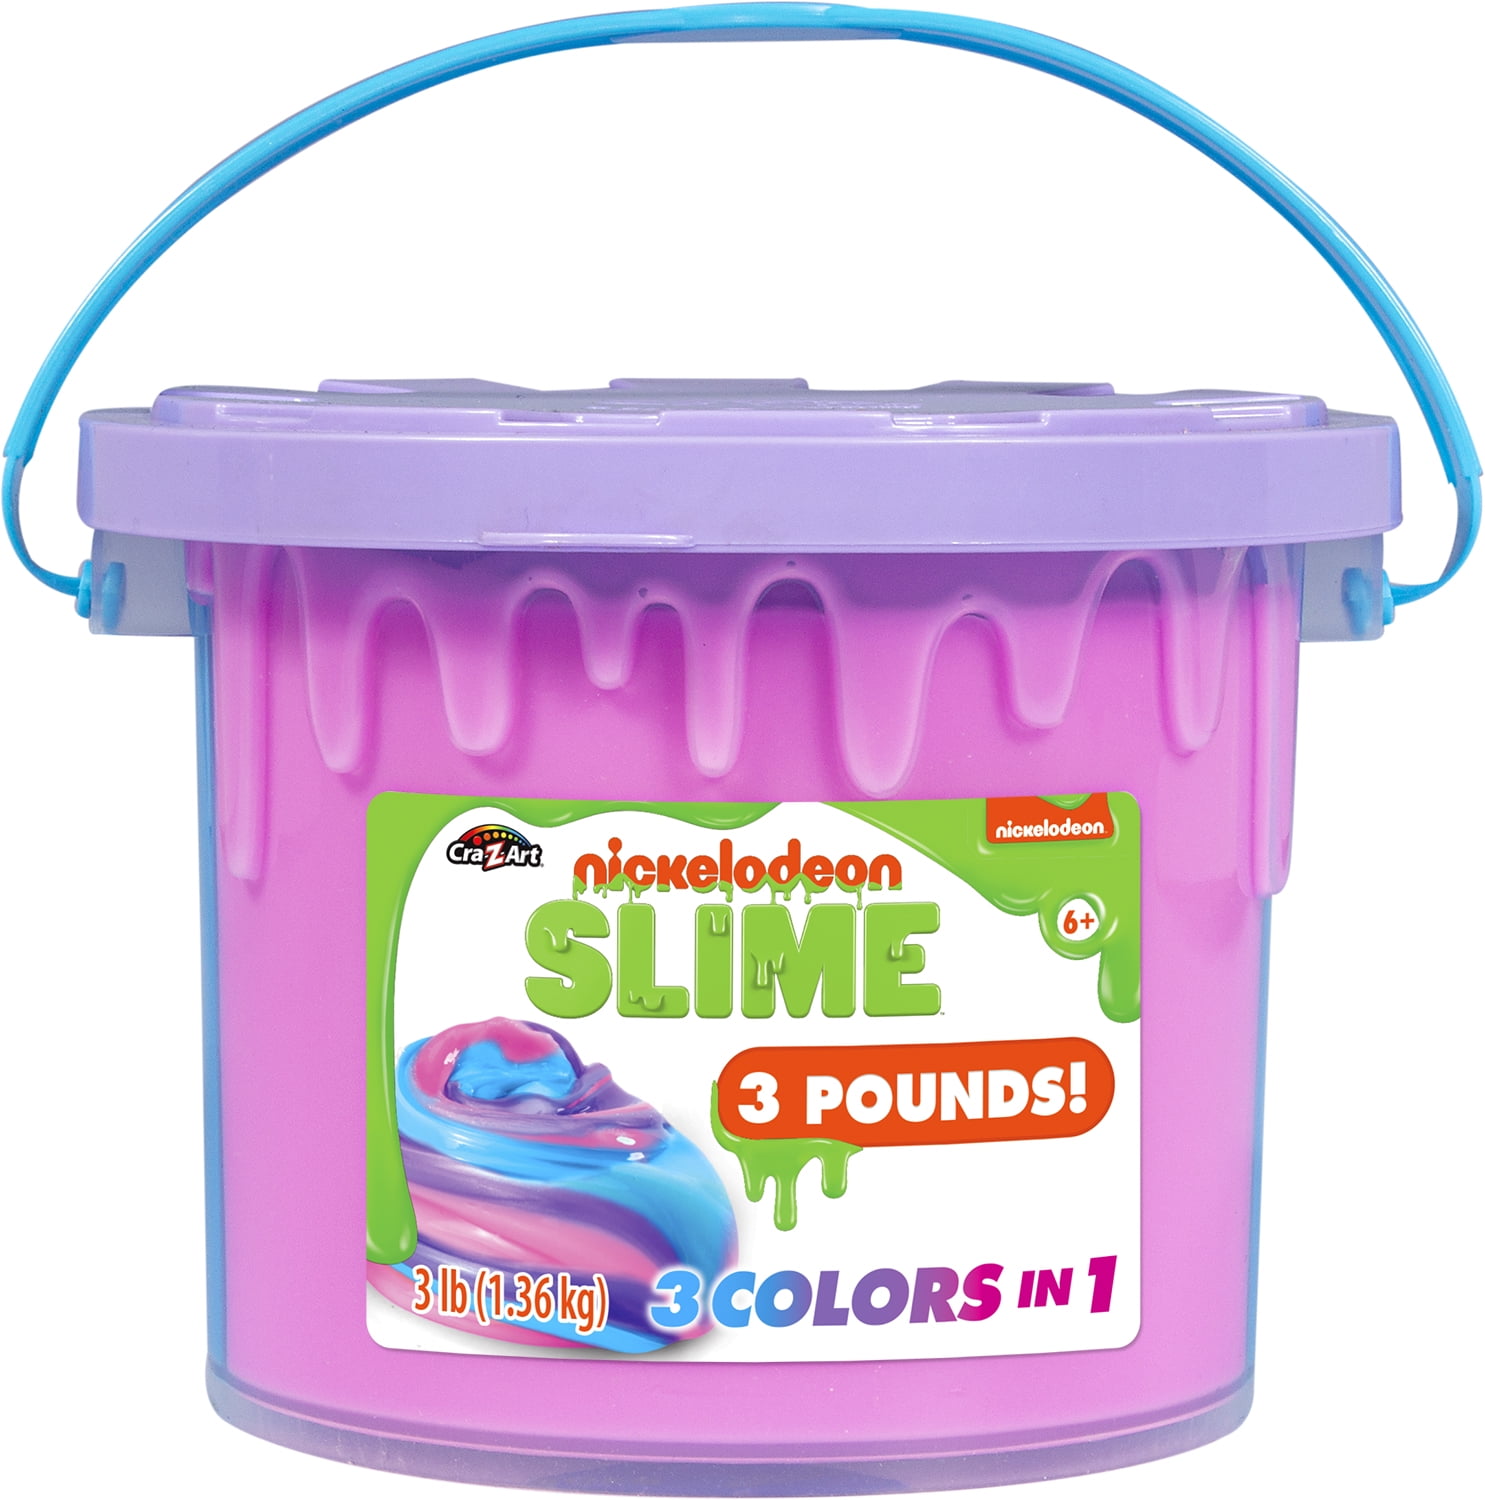 Nickelodeon Tri Color Slime Bucket By Cra Z Art Colors May